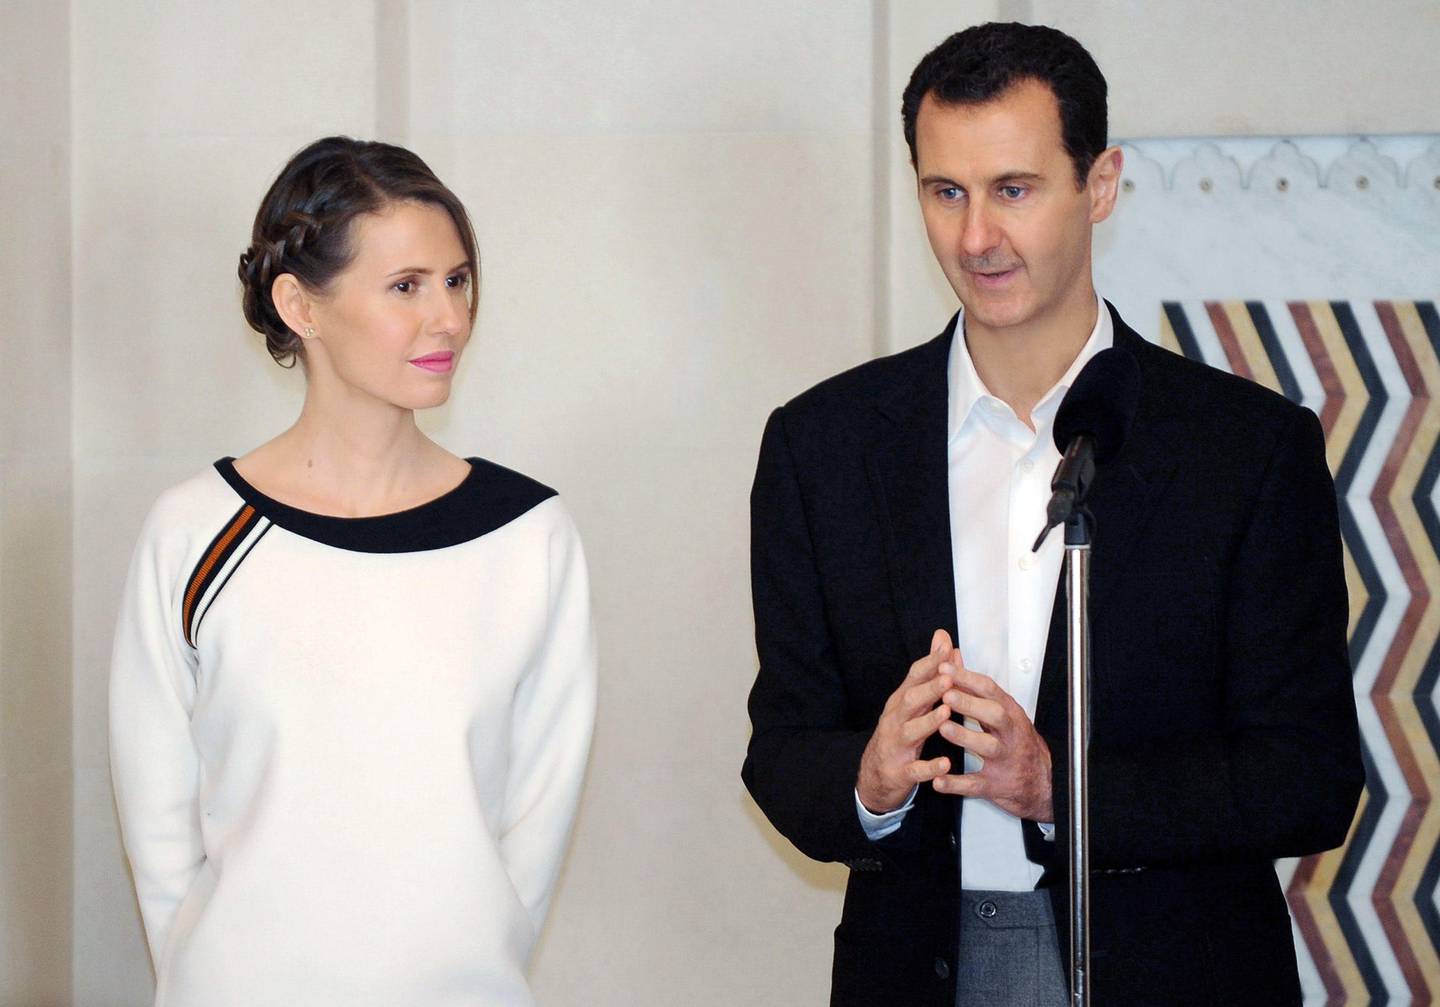 (FILES) This file handout photo released by the official Syrian Arab News Agency (SANA) shows Syrian President Bashar al-Assad (R) speaking next to his wife Asma as they receive members of the army and their mother's to celebrate Mother's Day in the capital Damascus on March 21, 2016. - When the Arab revolts that were sweeping the region and toppling autocrats like dominoes reached Syria, Bashar al-Assad's days at the helm looked numbered. Ten years on however, he has defied the odds, surviving international isolation and the temporary loss of two thirds of the national territory to claw his way back into relevance and hold on to power. It seemed doubtful in March 2011 when protests broke out in Syria, that his ruling Alawite minority would be capable of withstanding the tide of uprisings dramatically reshaping the region. (Photo by - / various sources / AFP) / == RESTRICTED TO EDITORIAL USE - MANDATORY CREDIT "AFP PHOTO / HO / SANA" - NO MARKETING NO ADVERTISING CAMPAIGNS - DISTRIBUTED AS A SERVICE TO CLIENTS ==